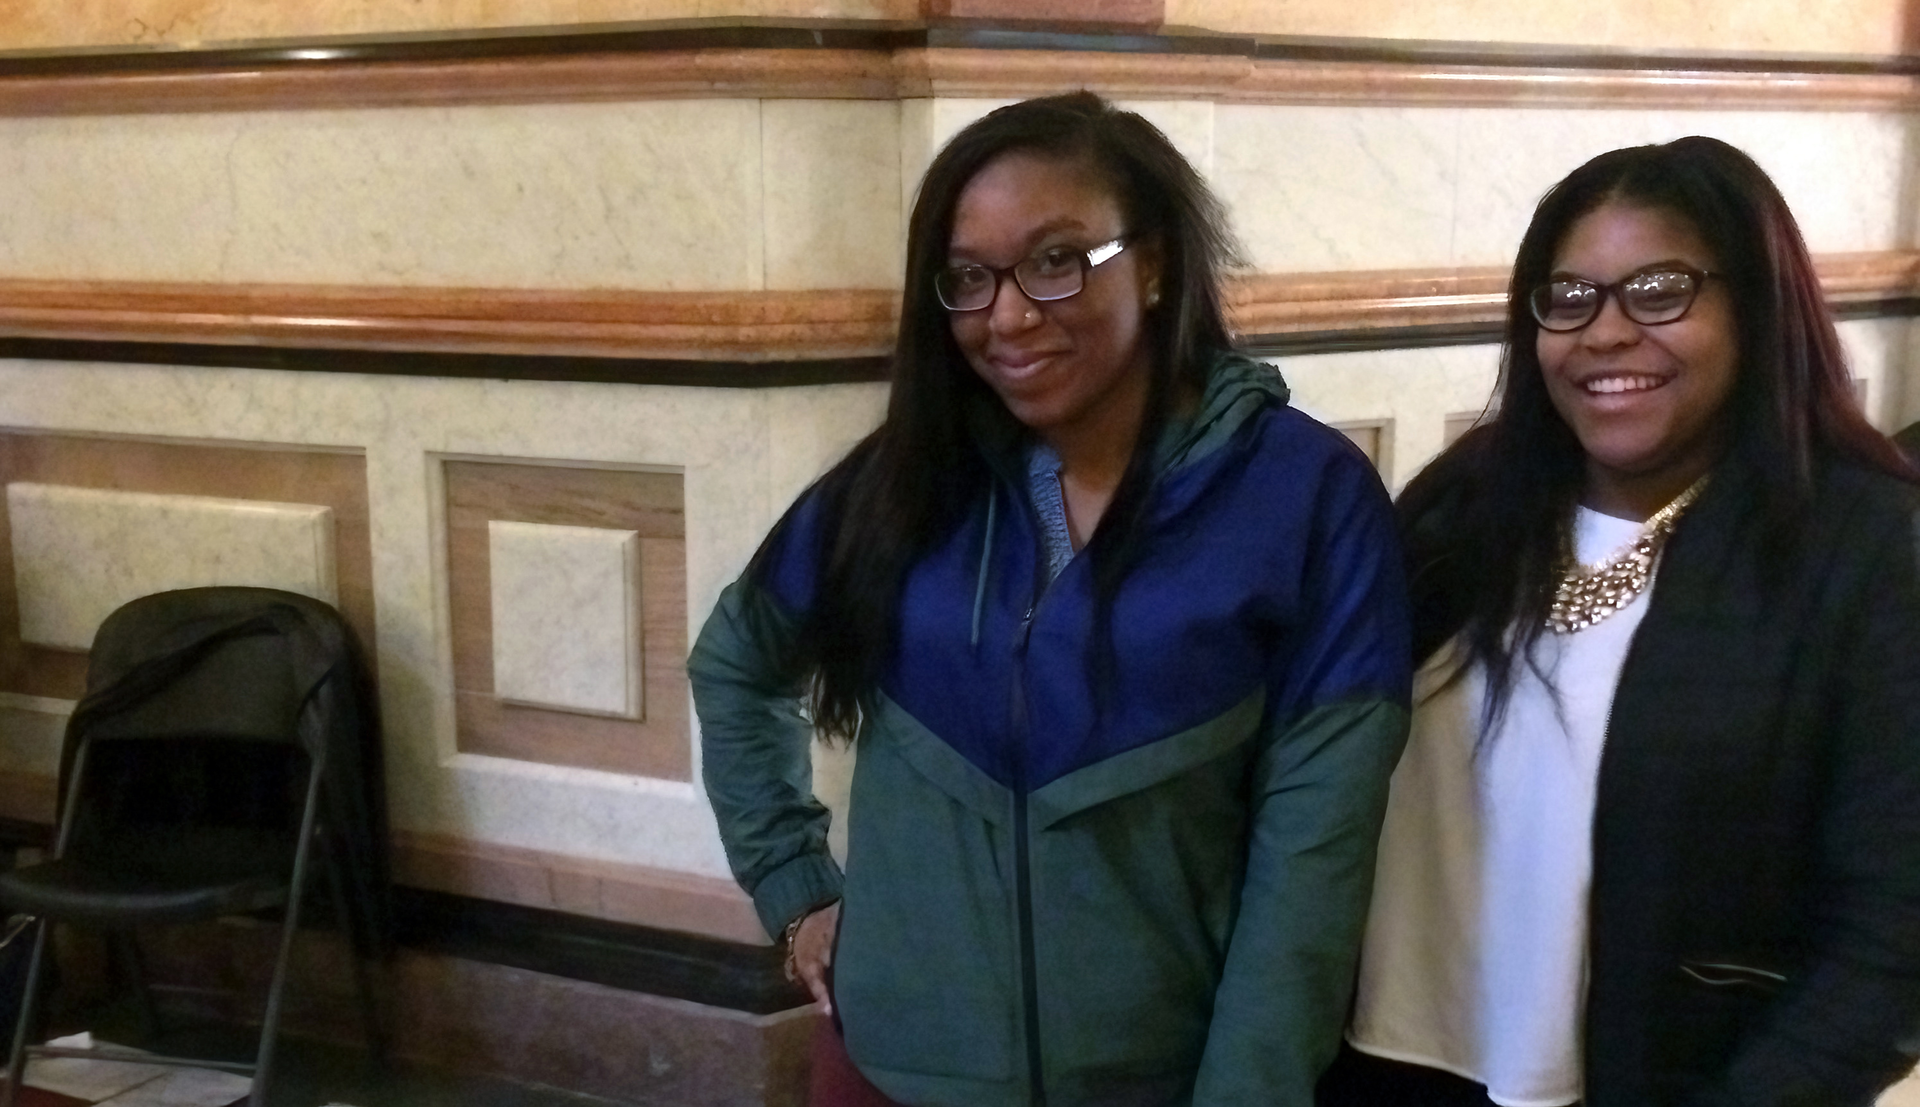 Two social work students smile in the state capitol building